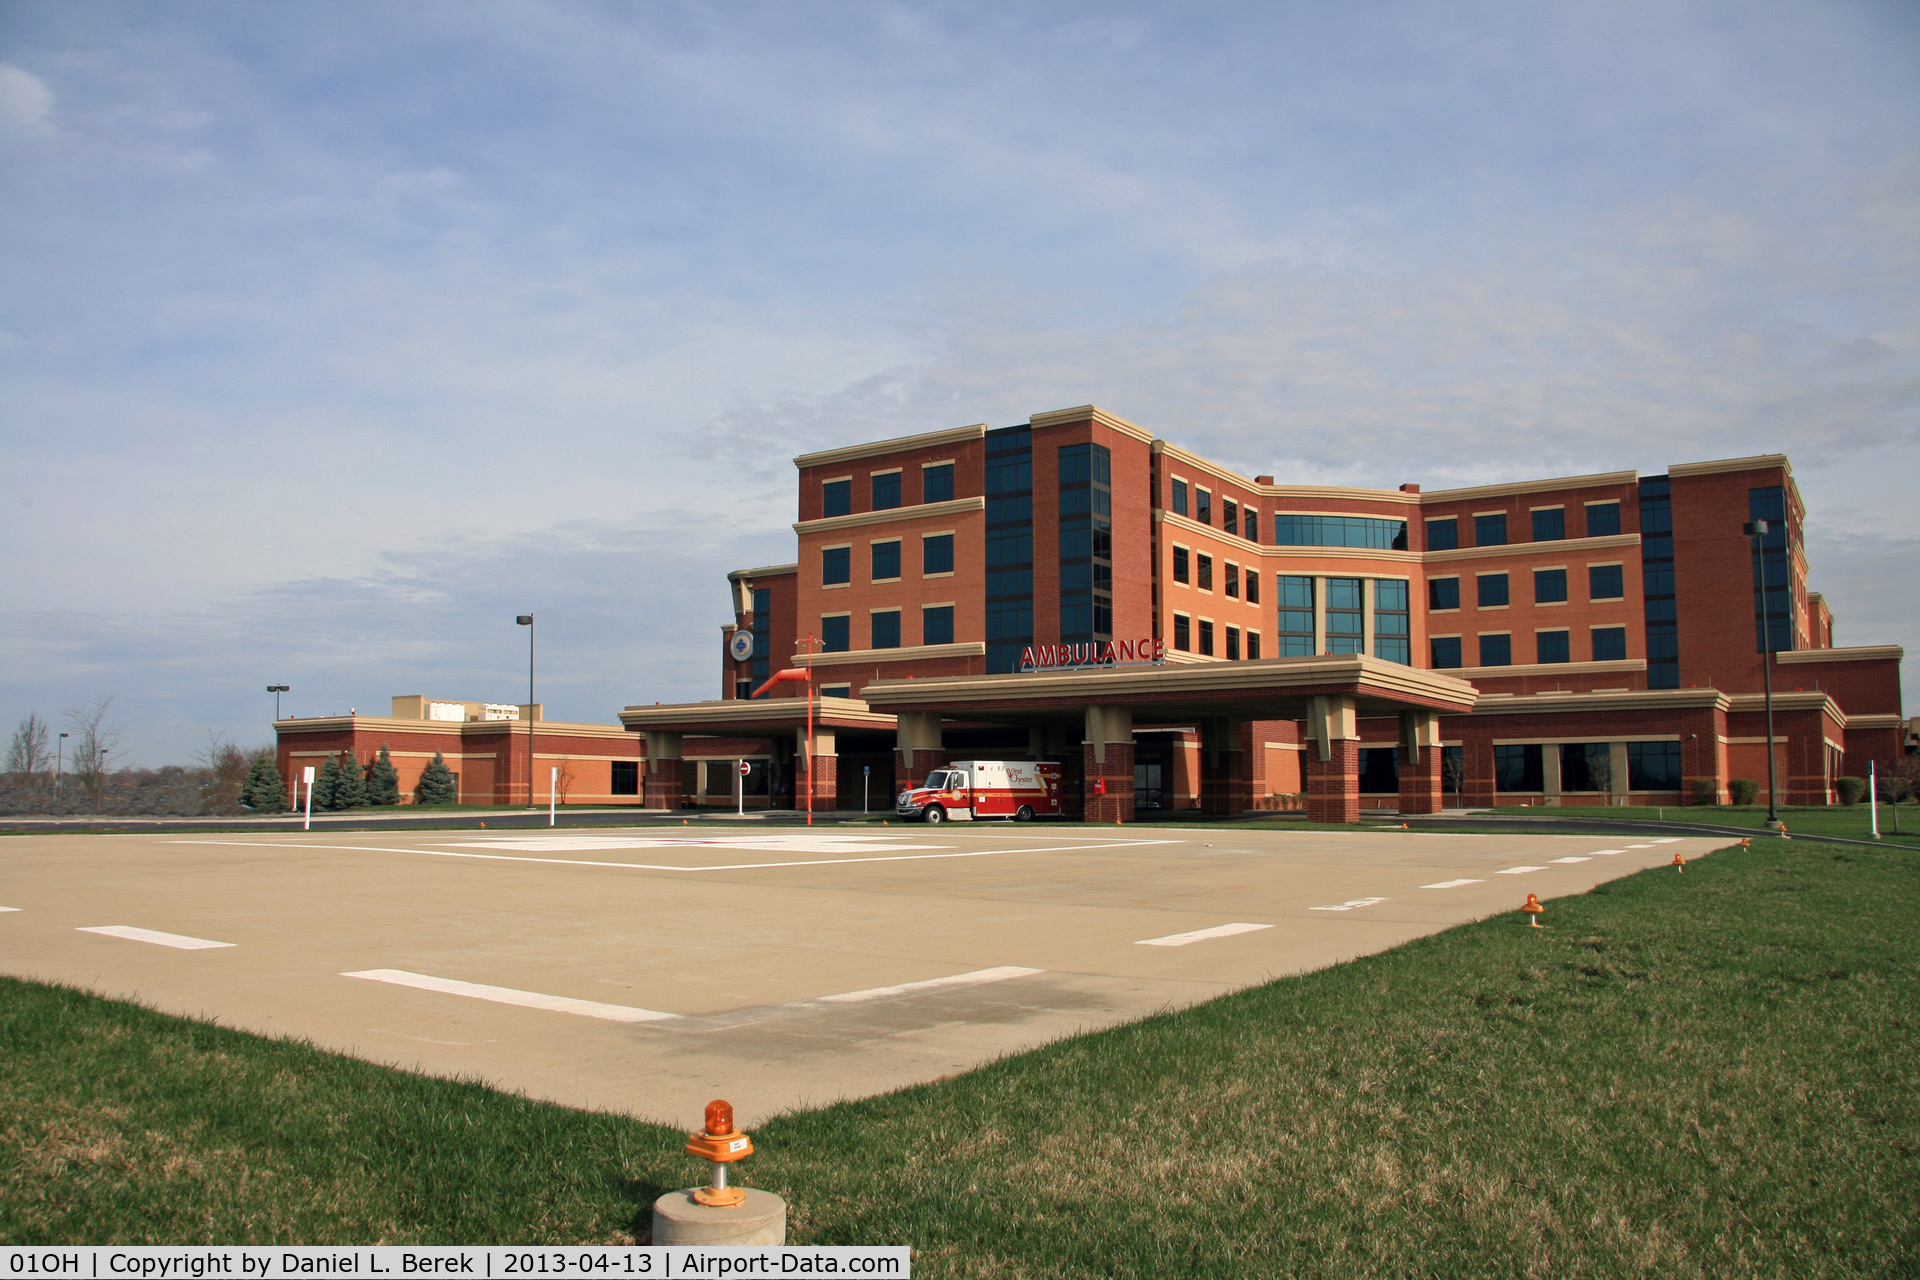 Atrium Medical Center Heliport (01OH) - This hospital Medevac heliport is located near Middletown, OH, between Dayton and Cincinnati.